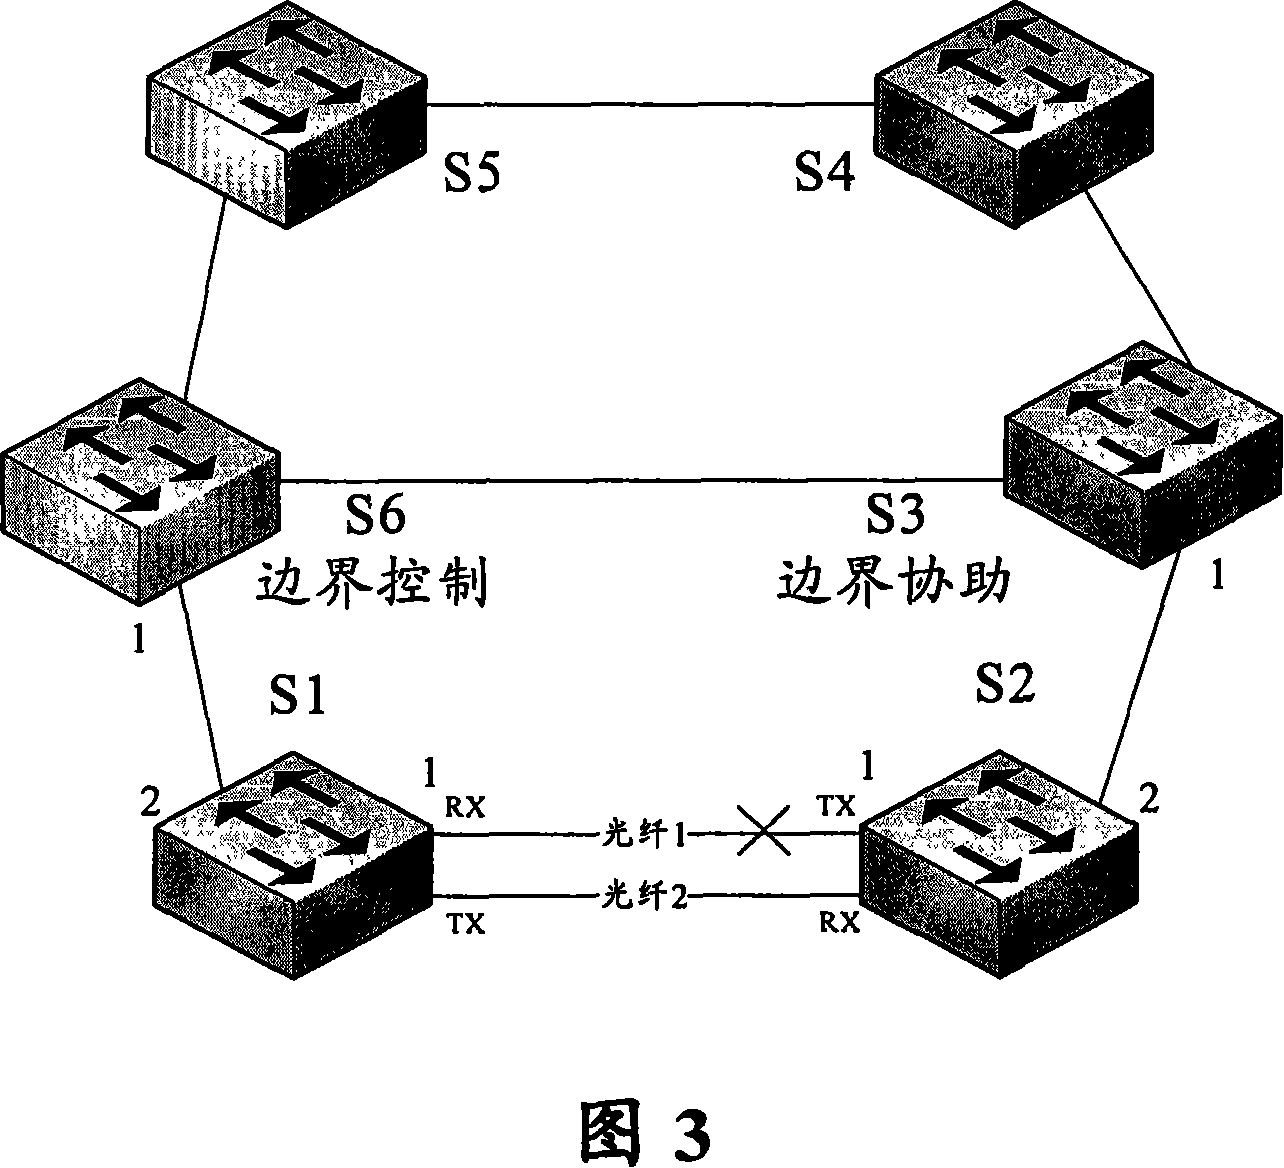 Single optical fiber fault processing method for Ethernet antomatic protection system